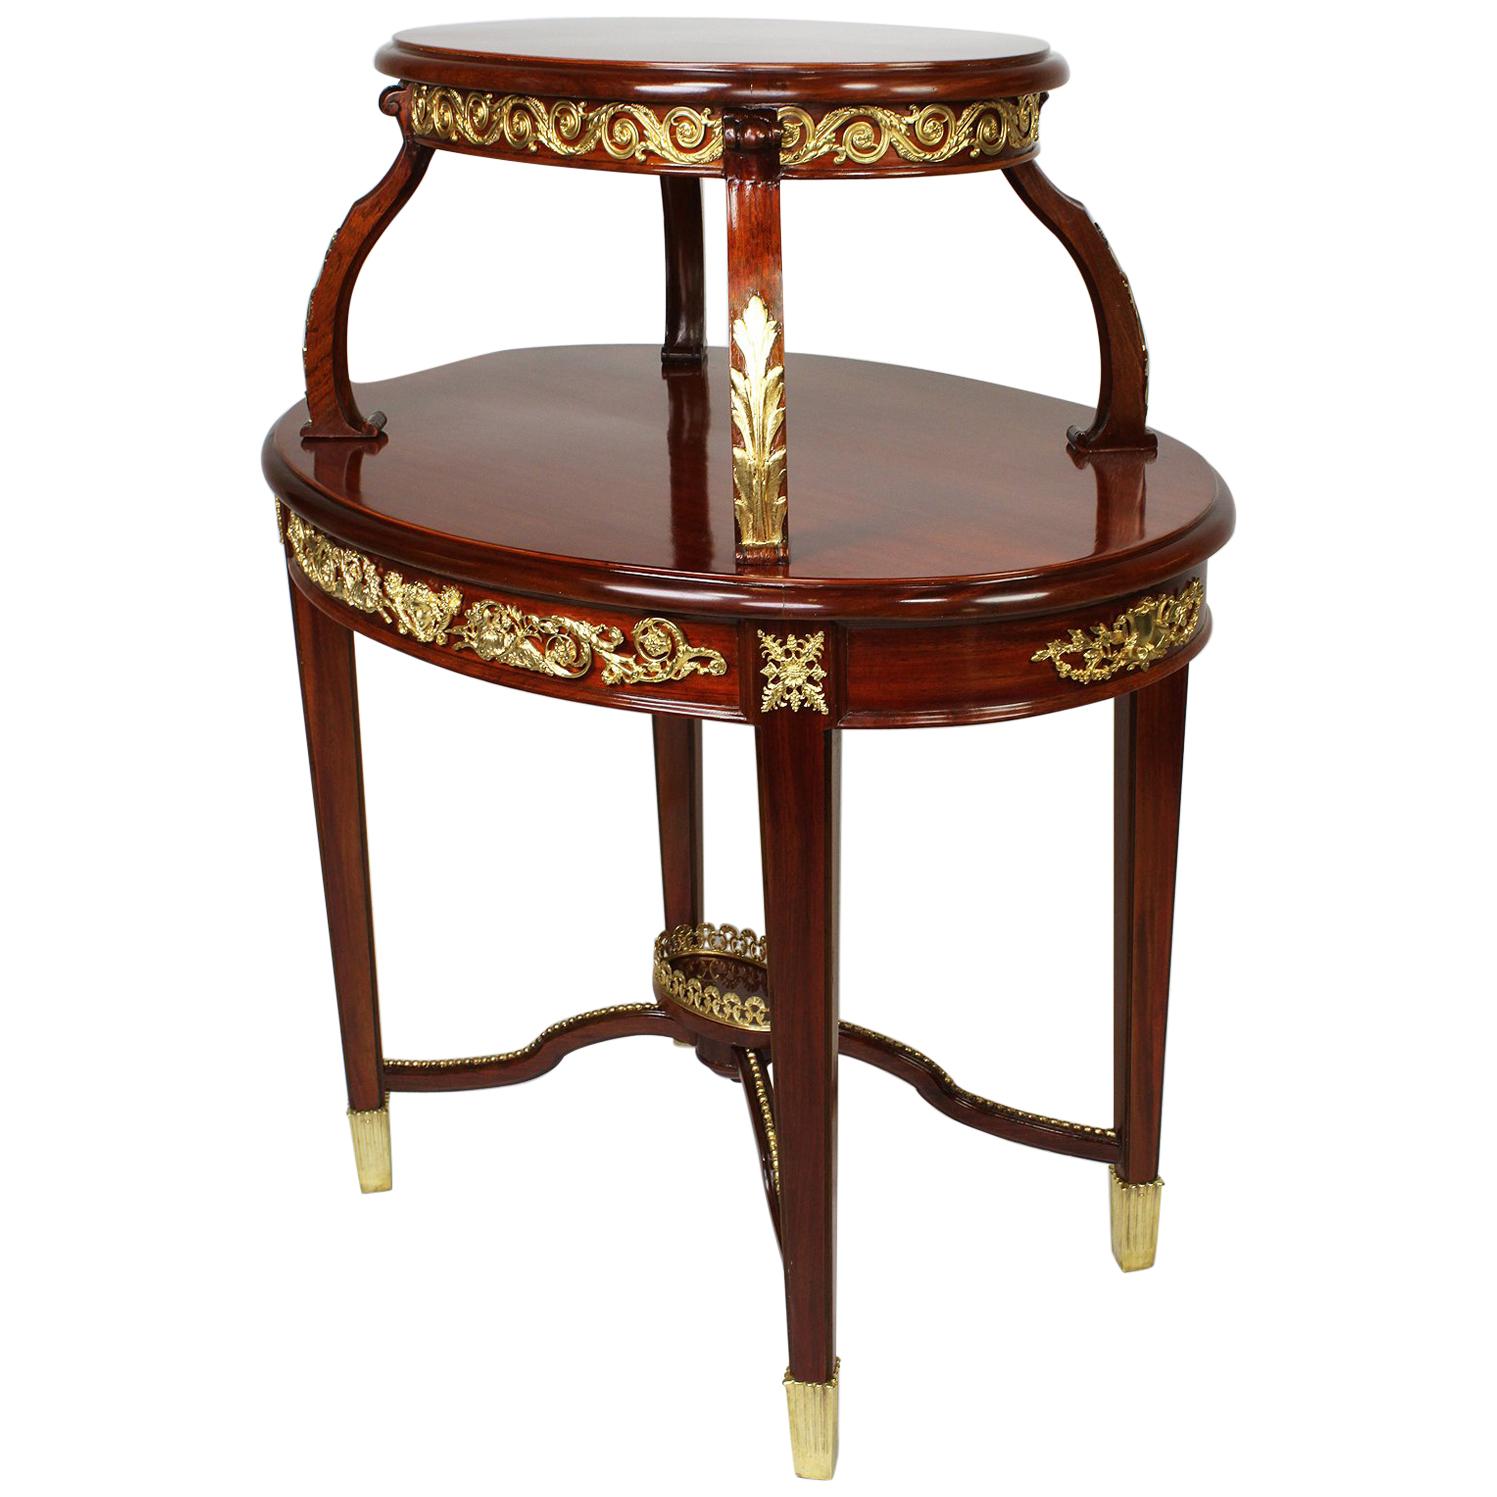 Louis XVI Style Mahogany and Ormolu Mounted 2-Tier Dessert Table by P. E. Guerin